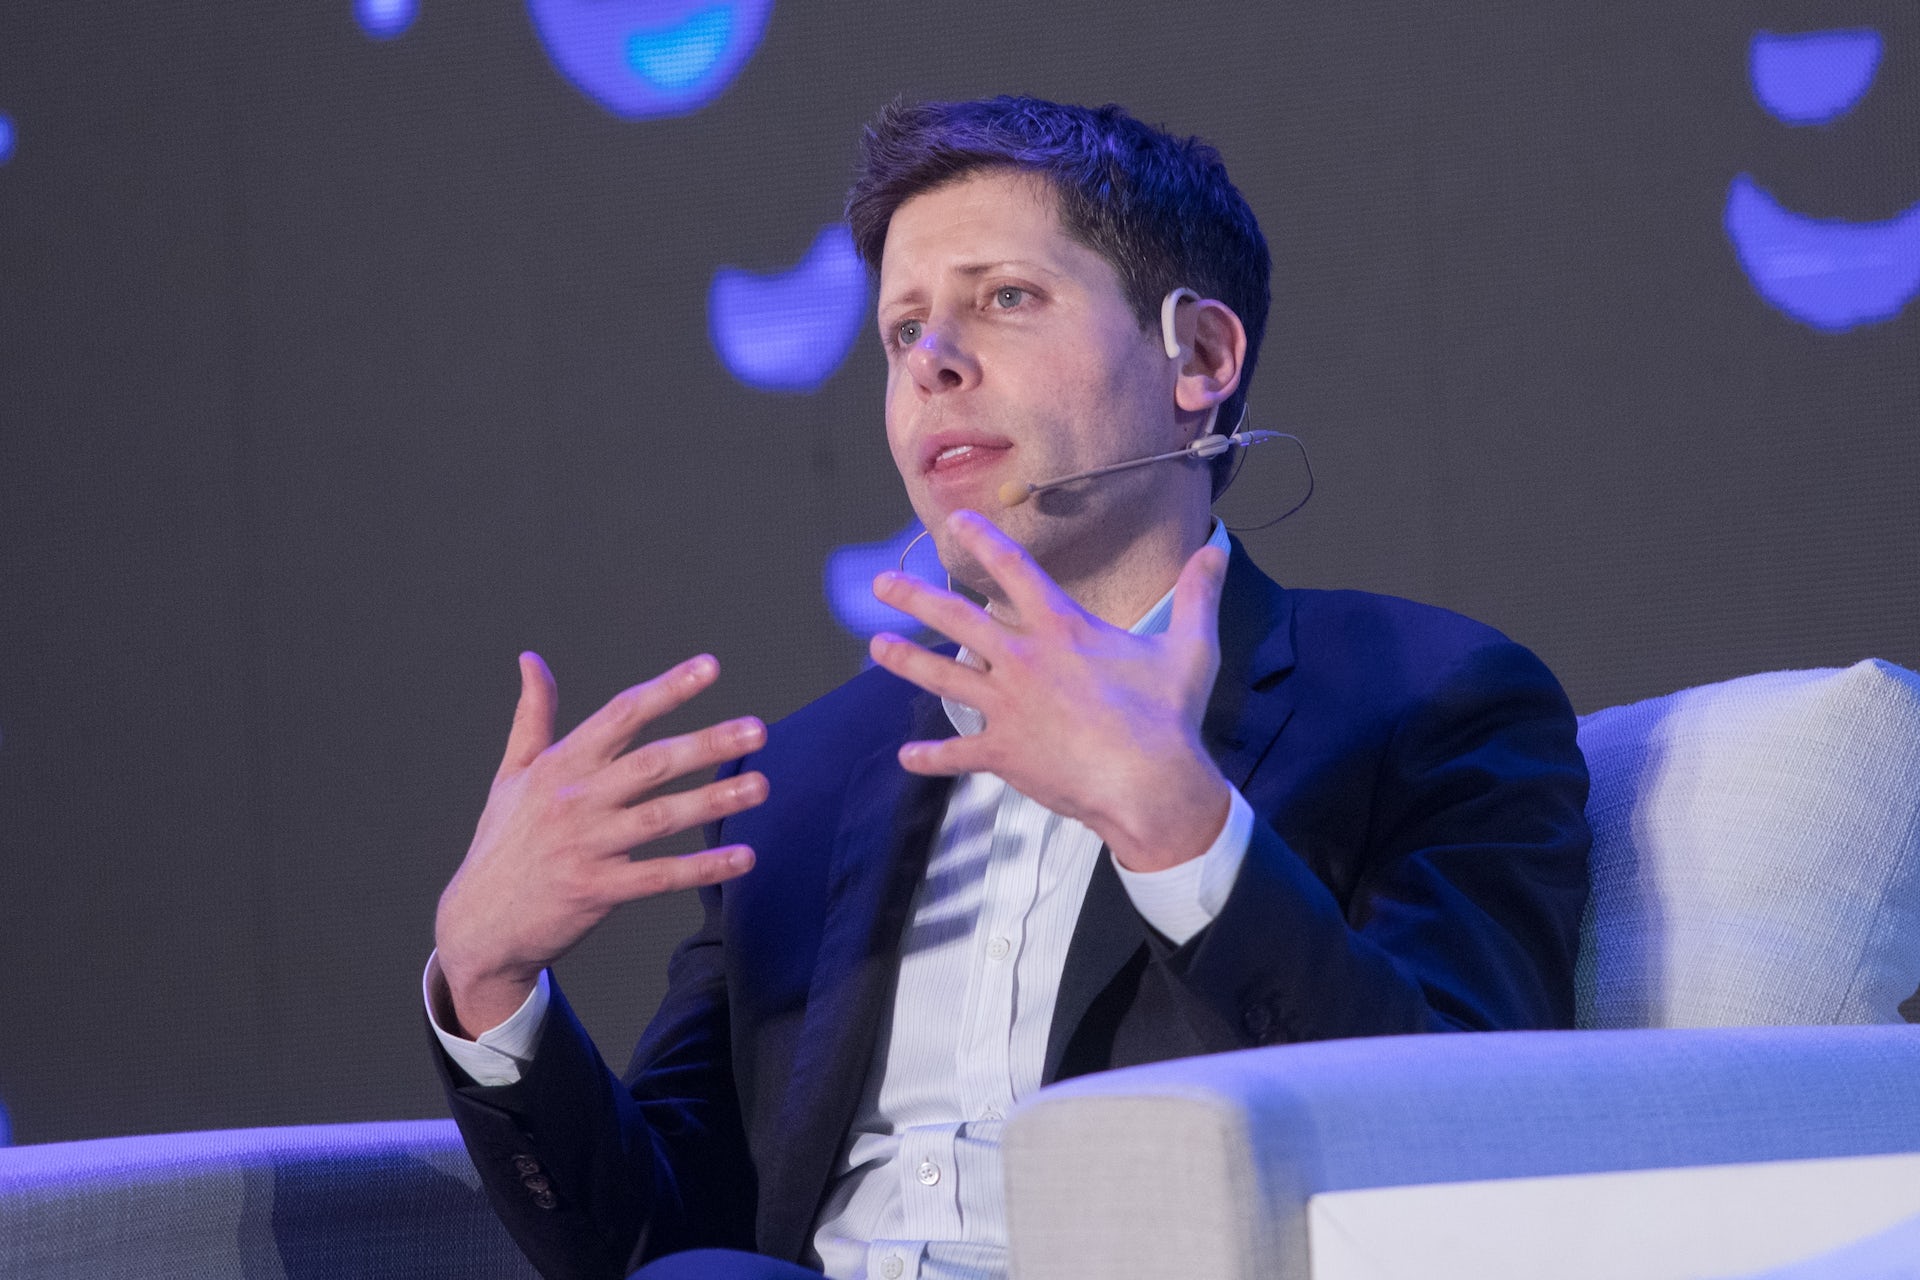 Sam Altman: The Former CEO of OpenAI - What Led to His Departure?